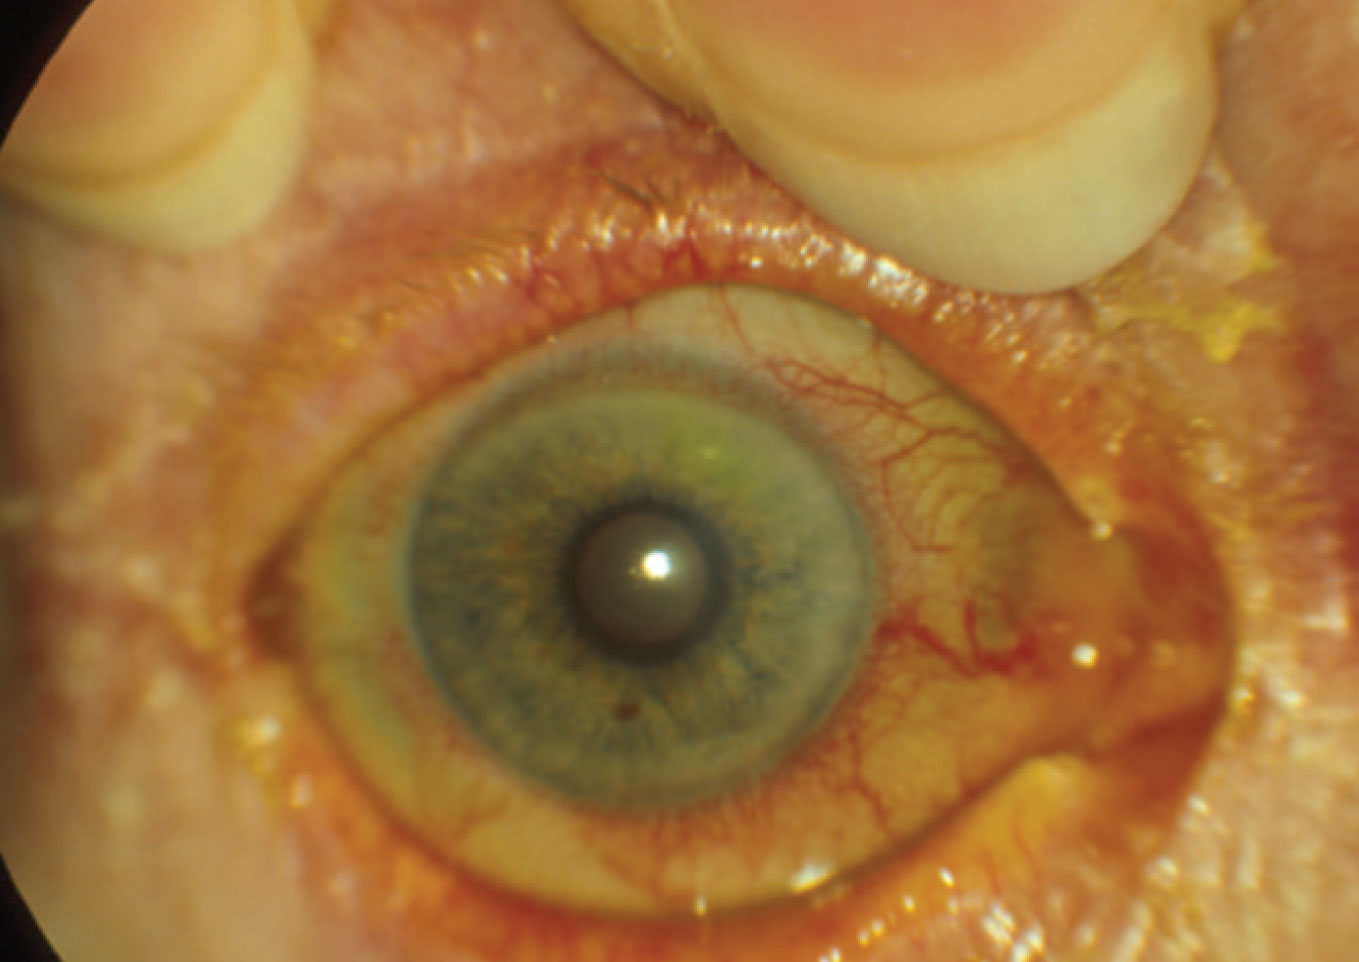 A ciliary flush is visible on examination.